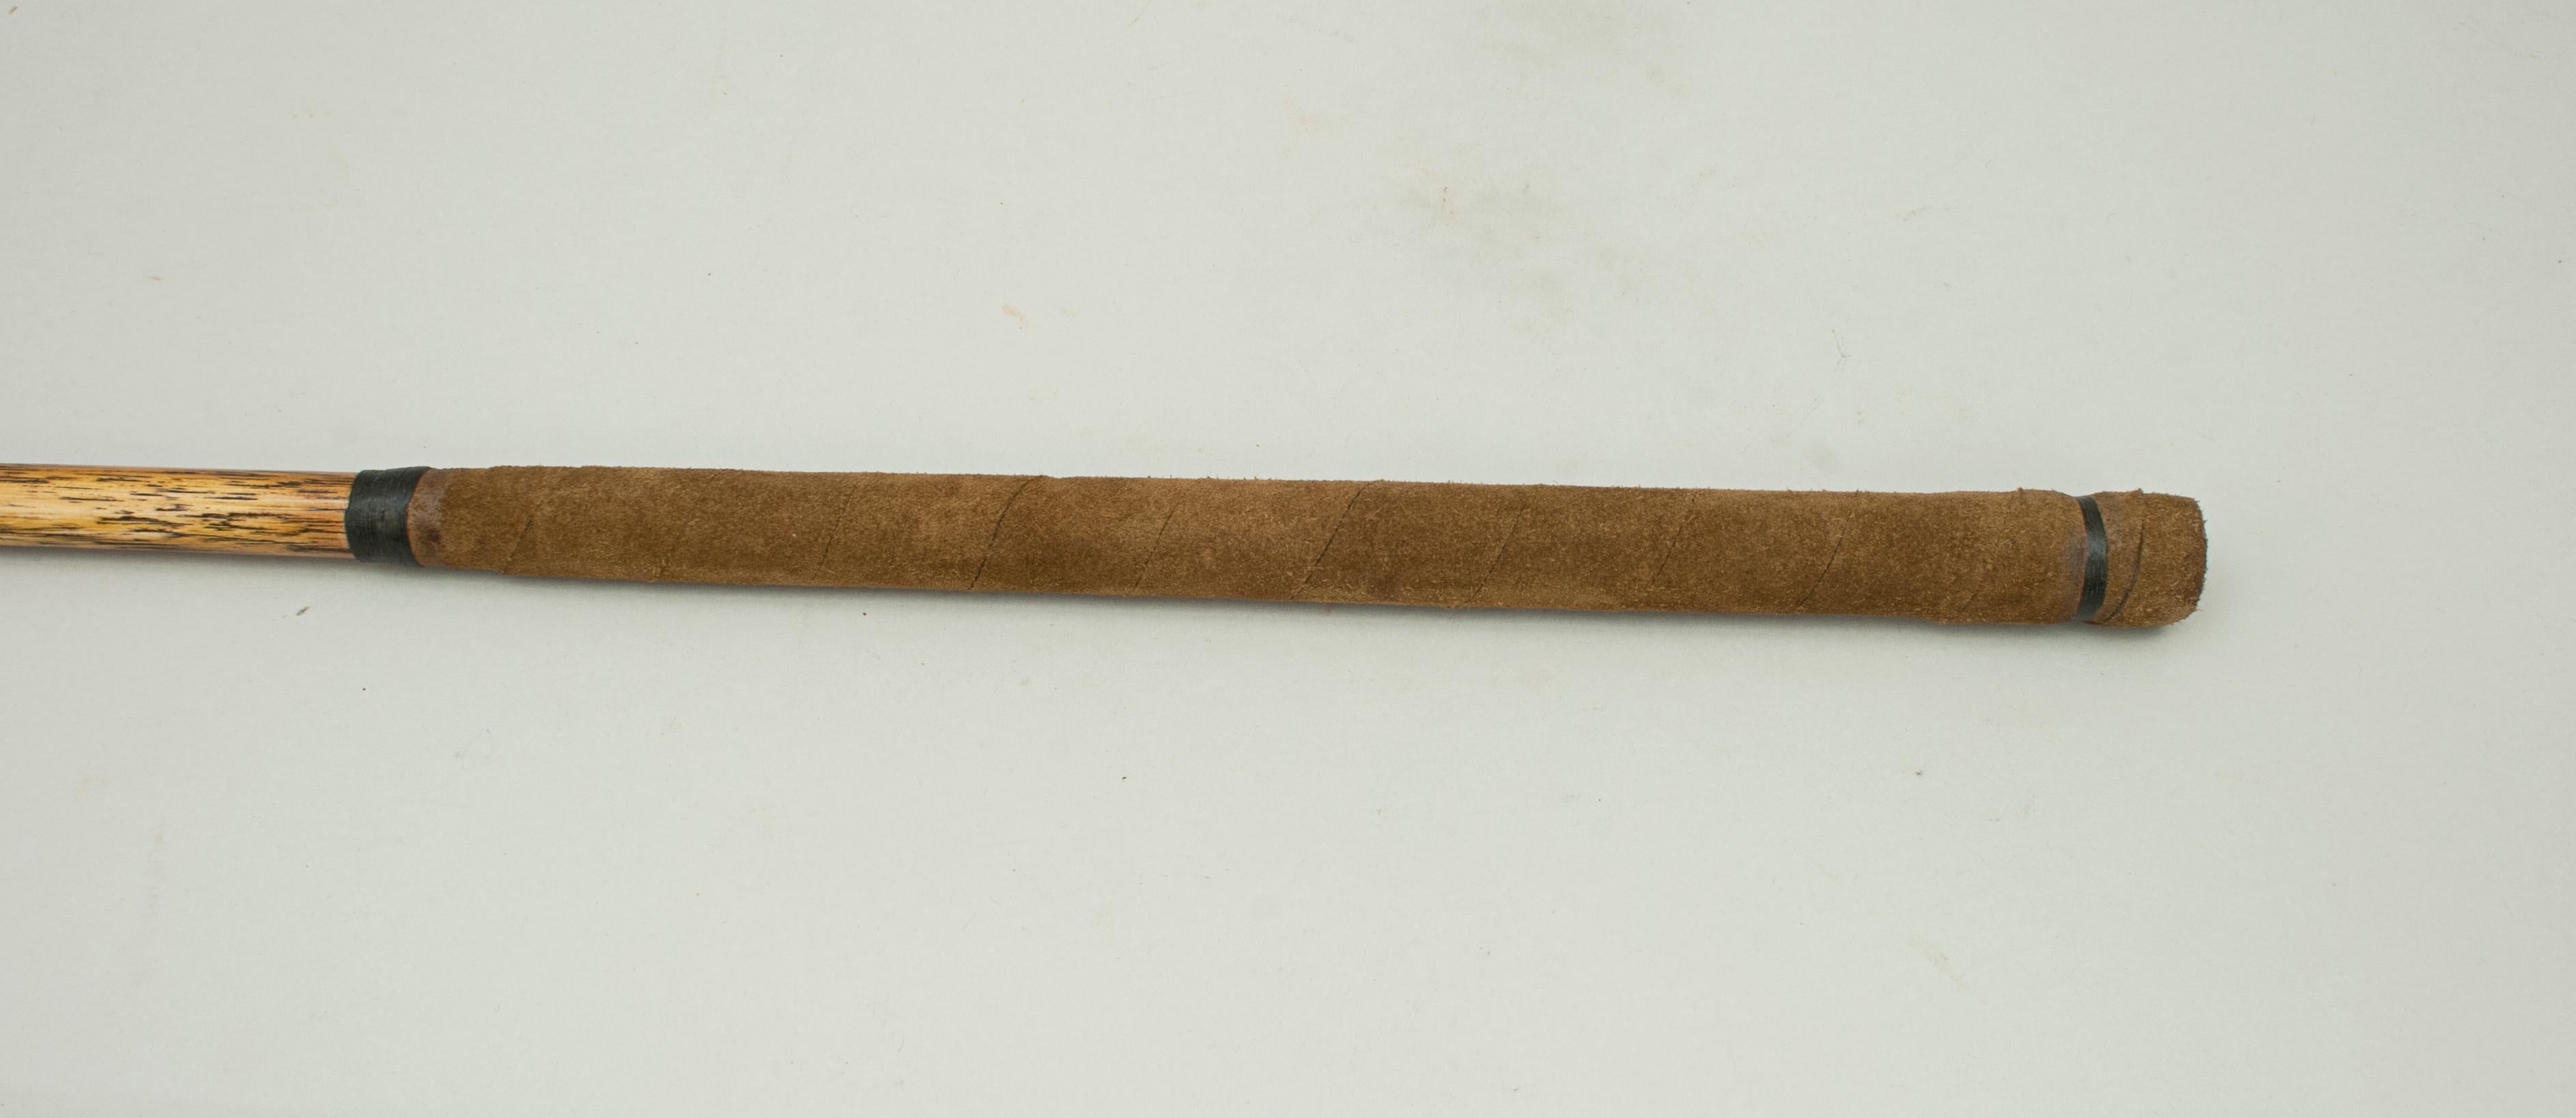 Scottish Antique Hickory Shafted Golf Club by James Gourlay of Carnoustie